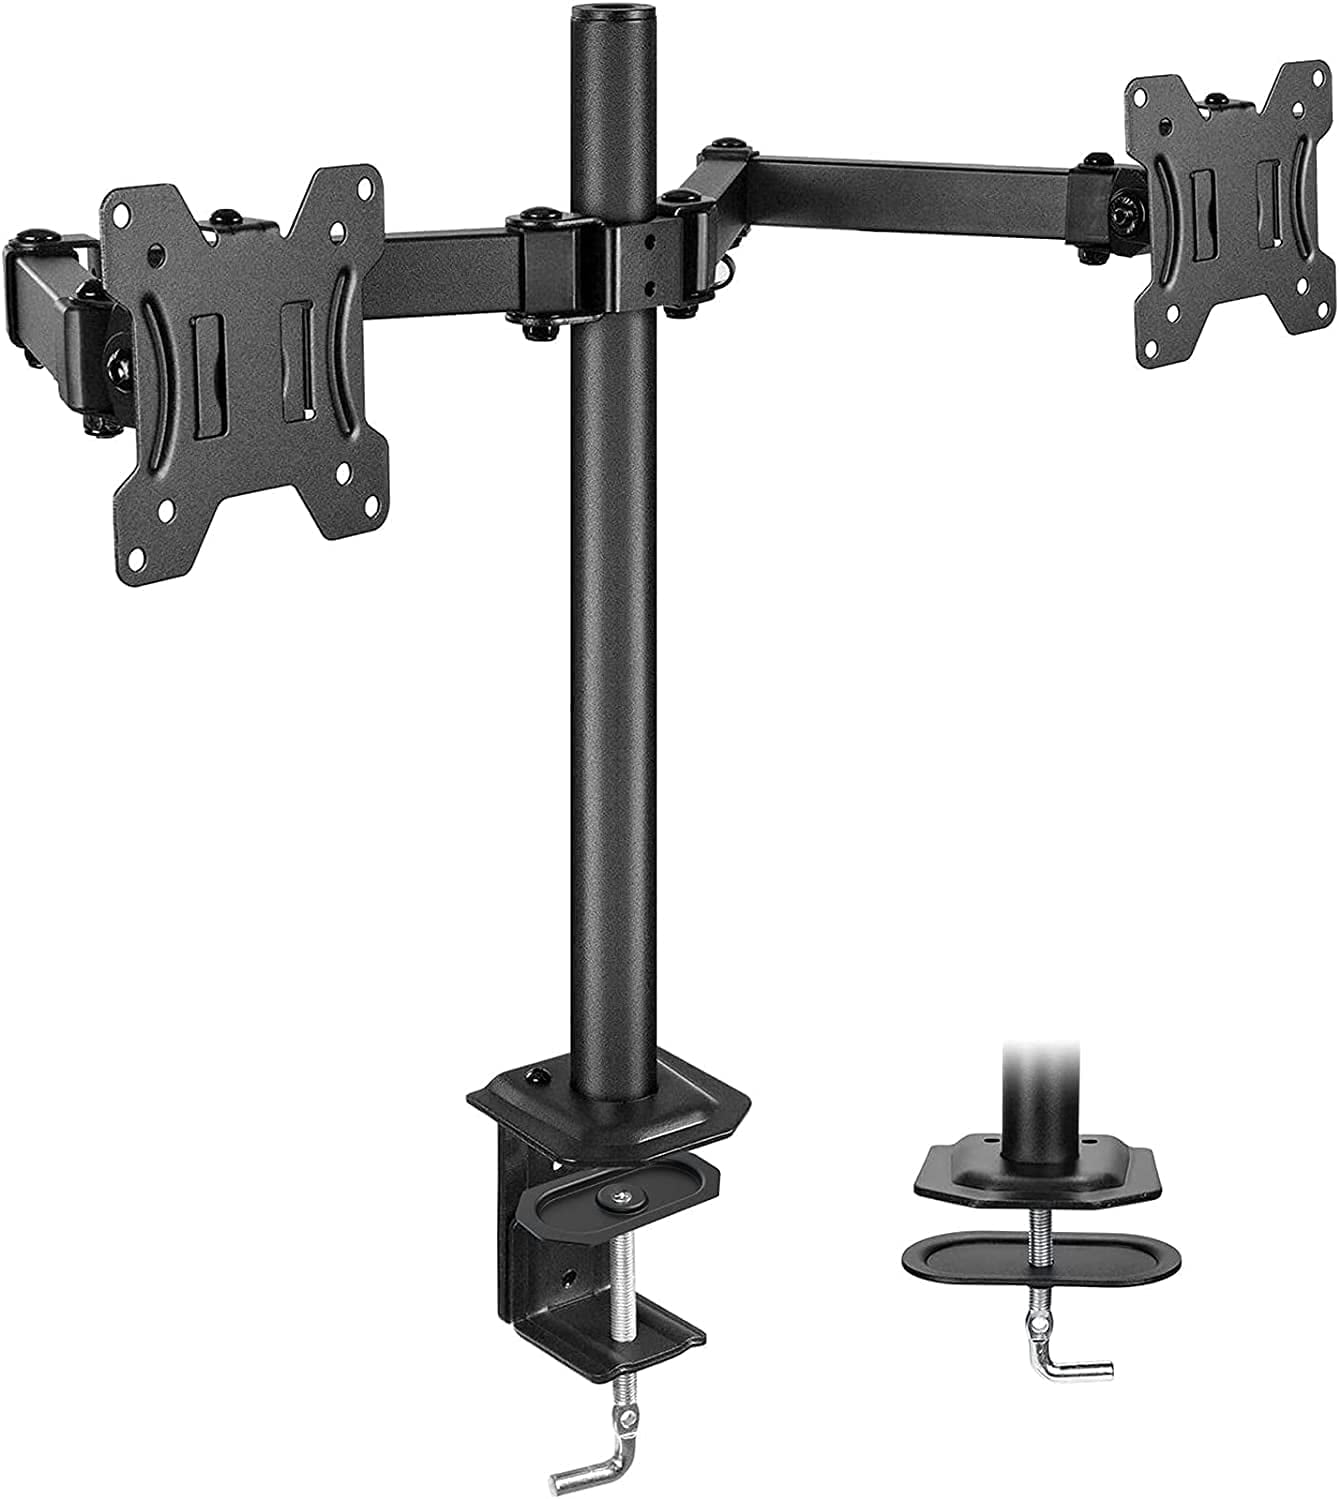 Black Fit 2/Two LCD PC Screens up to 27 Inch EleTab Dual Monitor Arm Mount 8KG Heavy Duty Double Monitor Stand Desk Mount Fully Adjustable VESA Dimensions: 75x75-100x100mm 